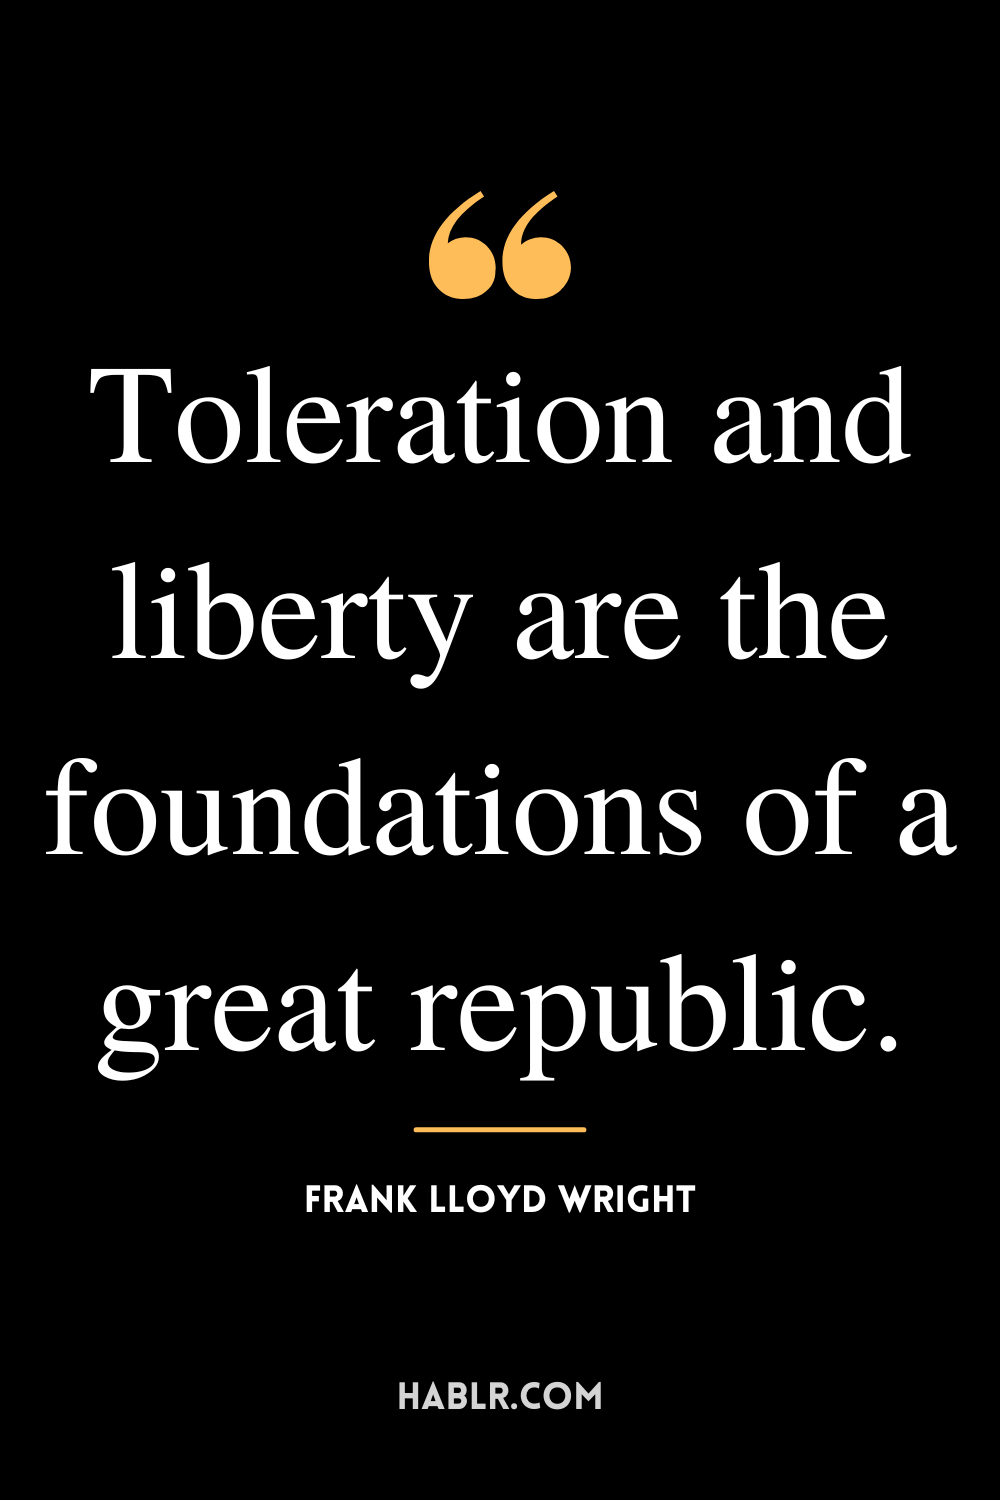 "Toleration and liberty are the foundations of a great republic." -Frank Lloyd Wright